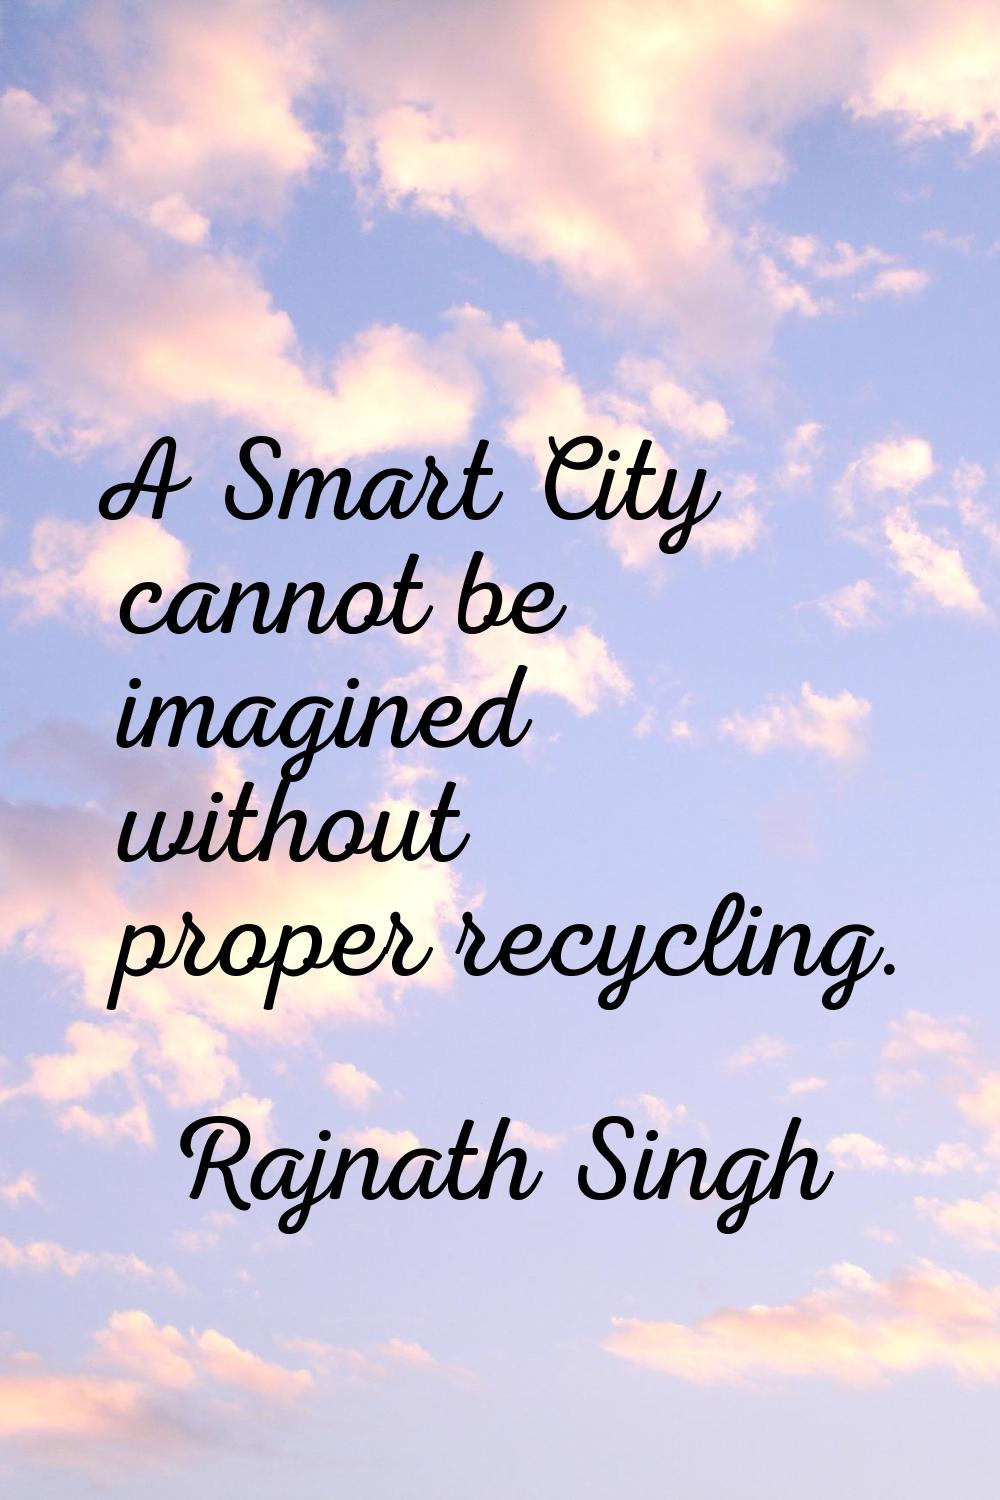 A Smart City cannot be imagined without proper recycling.